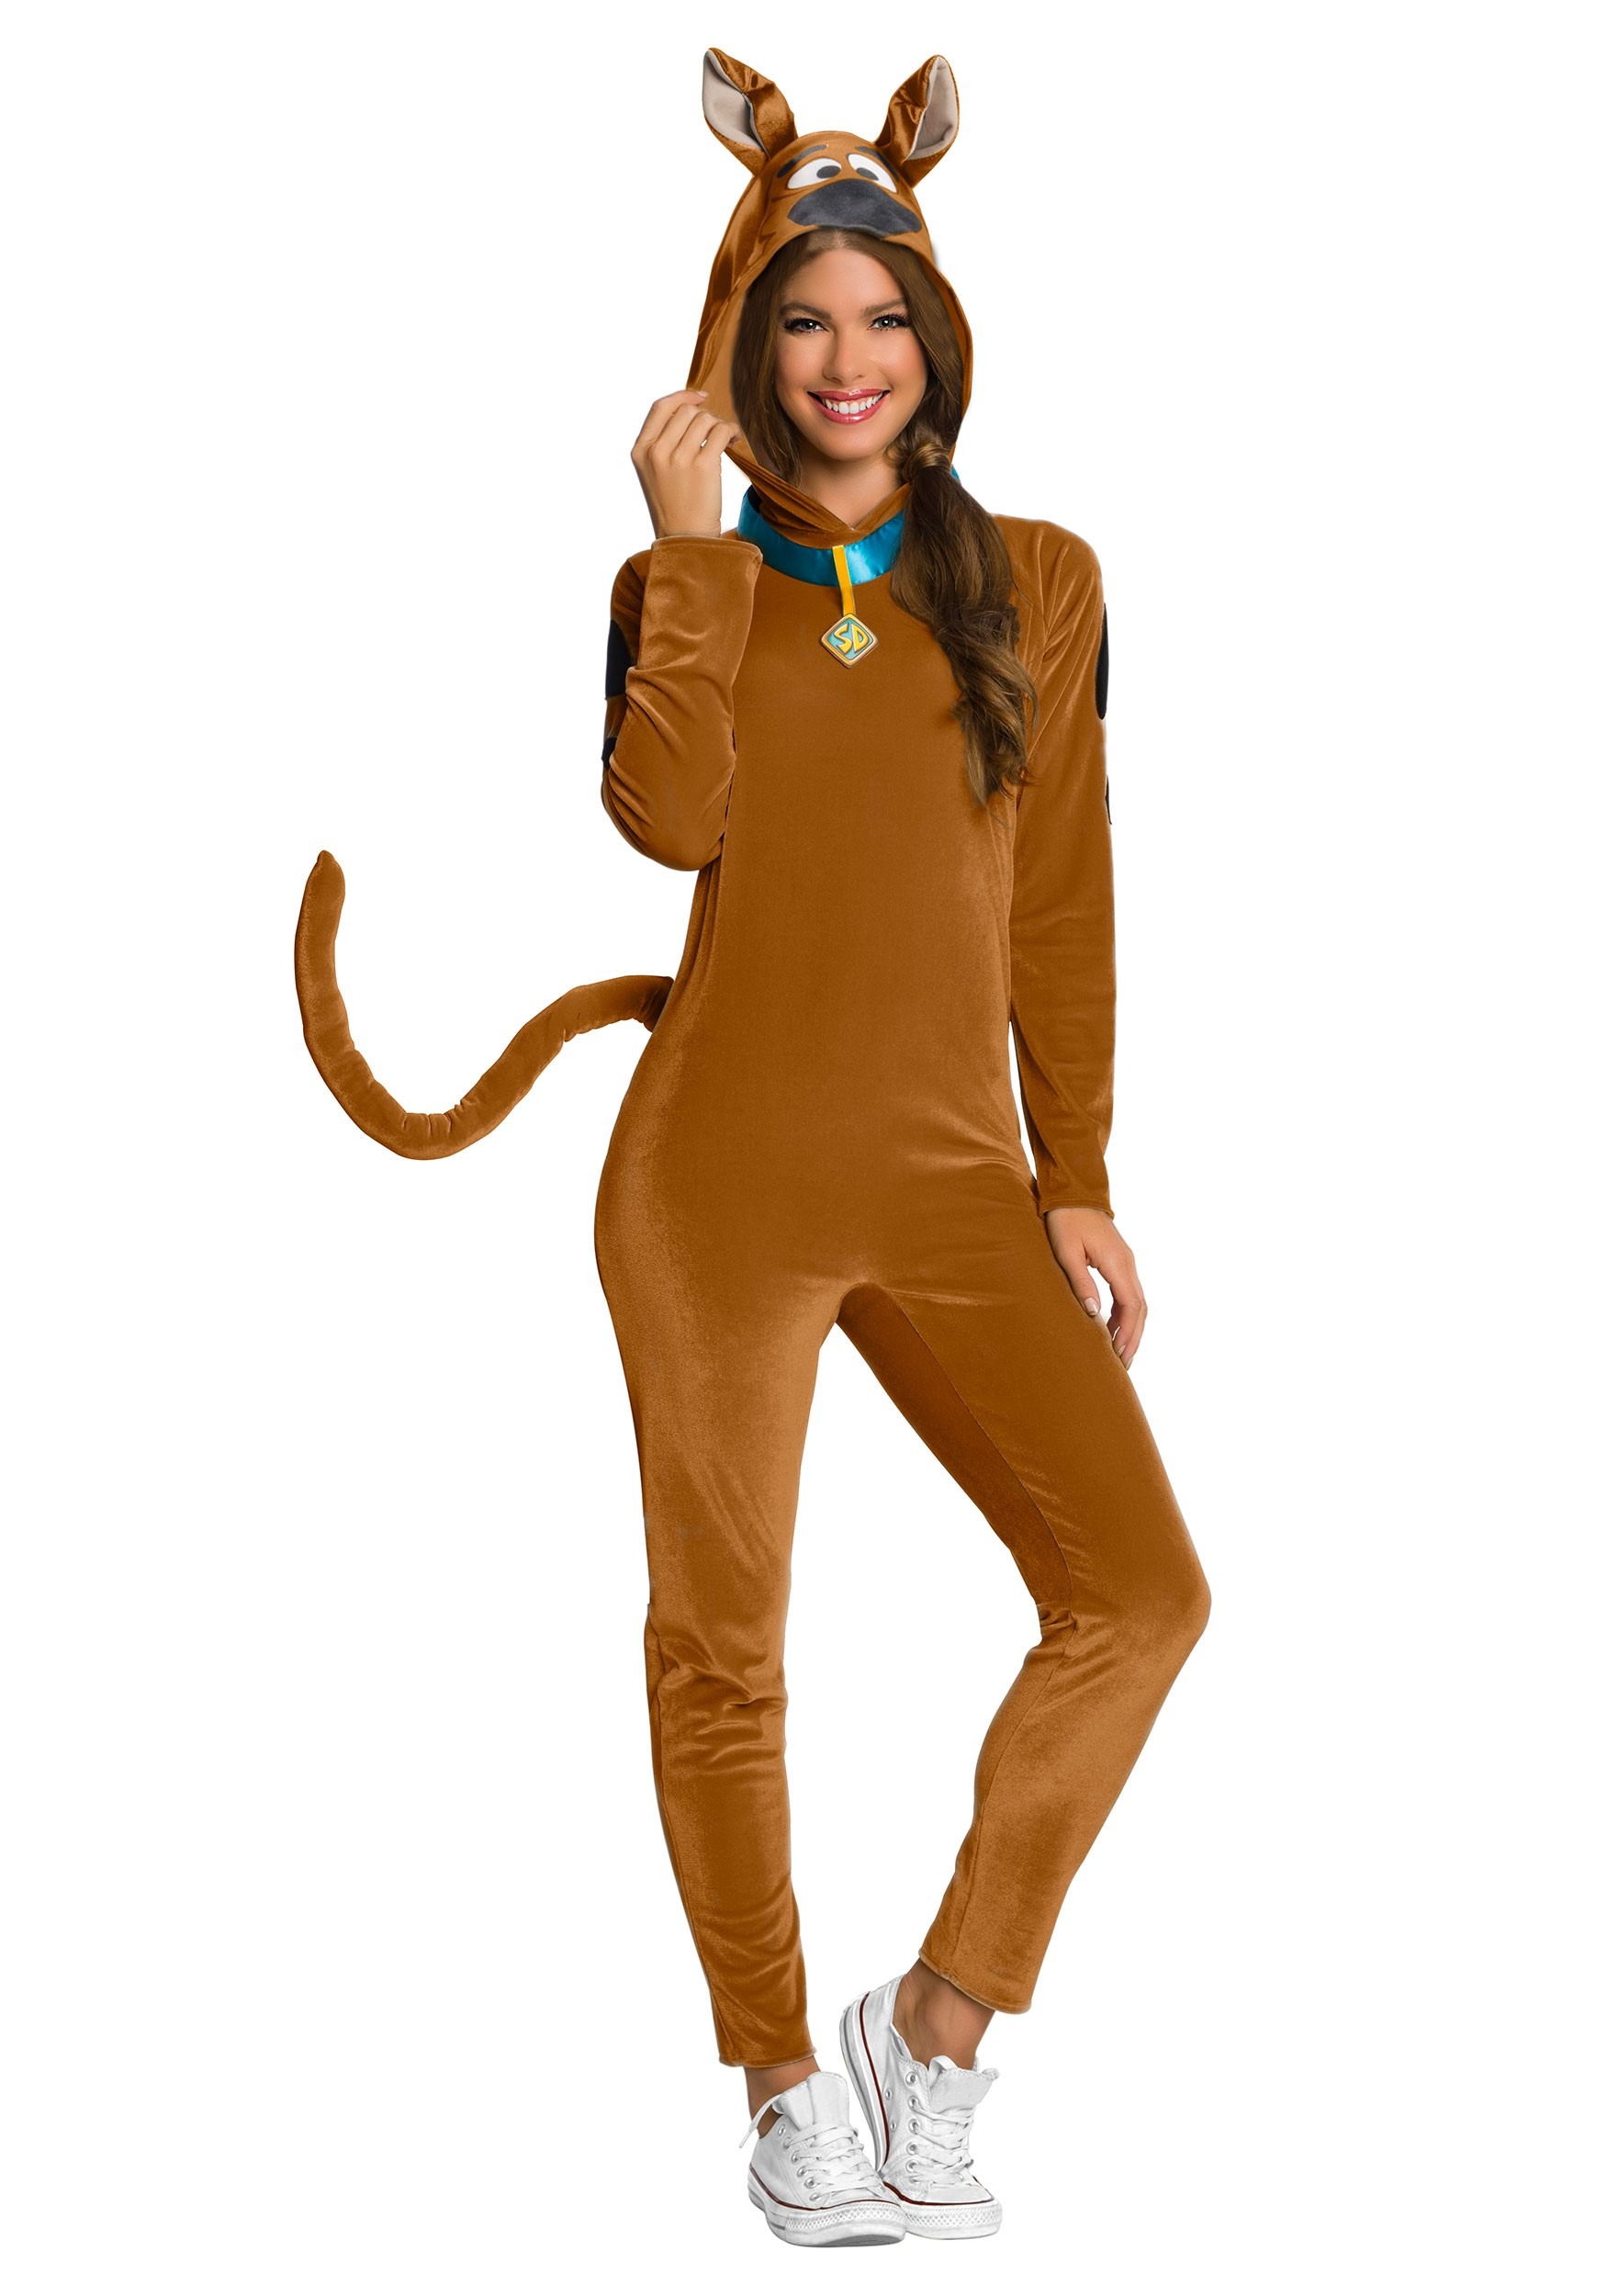  Scooby  Doo  Women s Costume  Jumpsuit W Collar and Tail